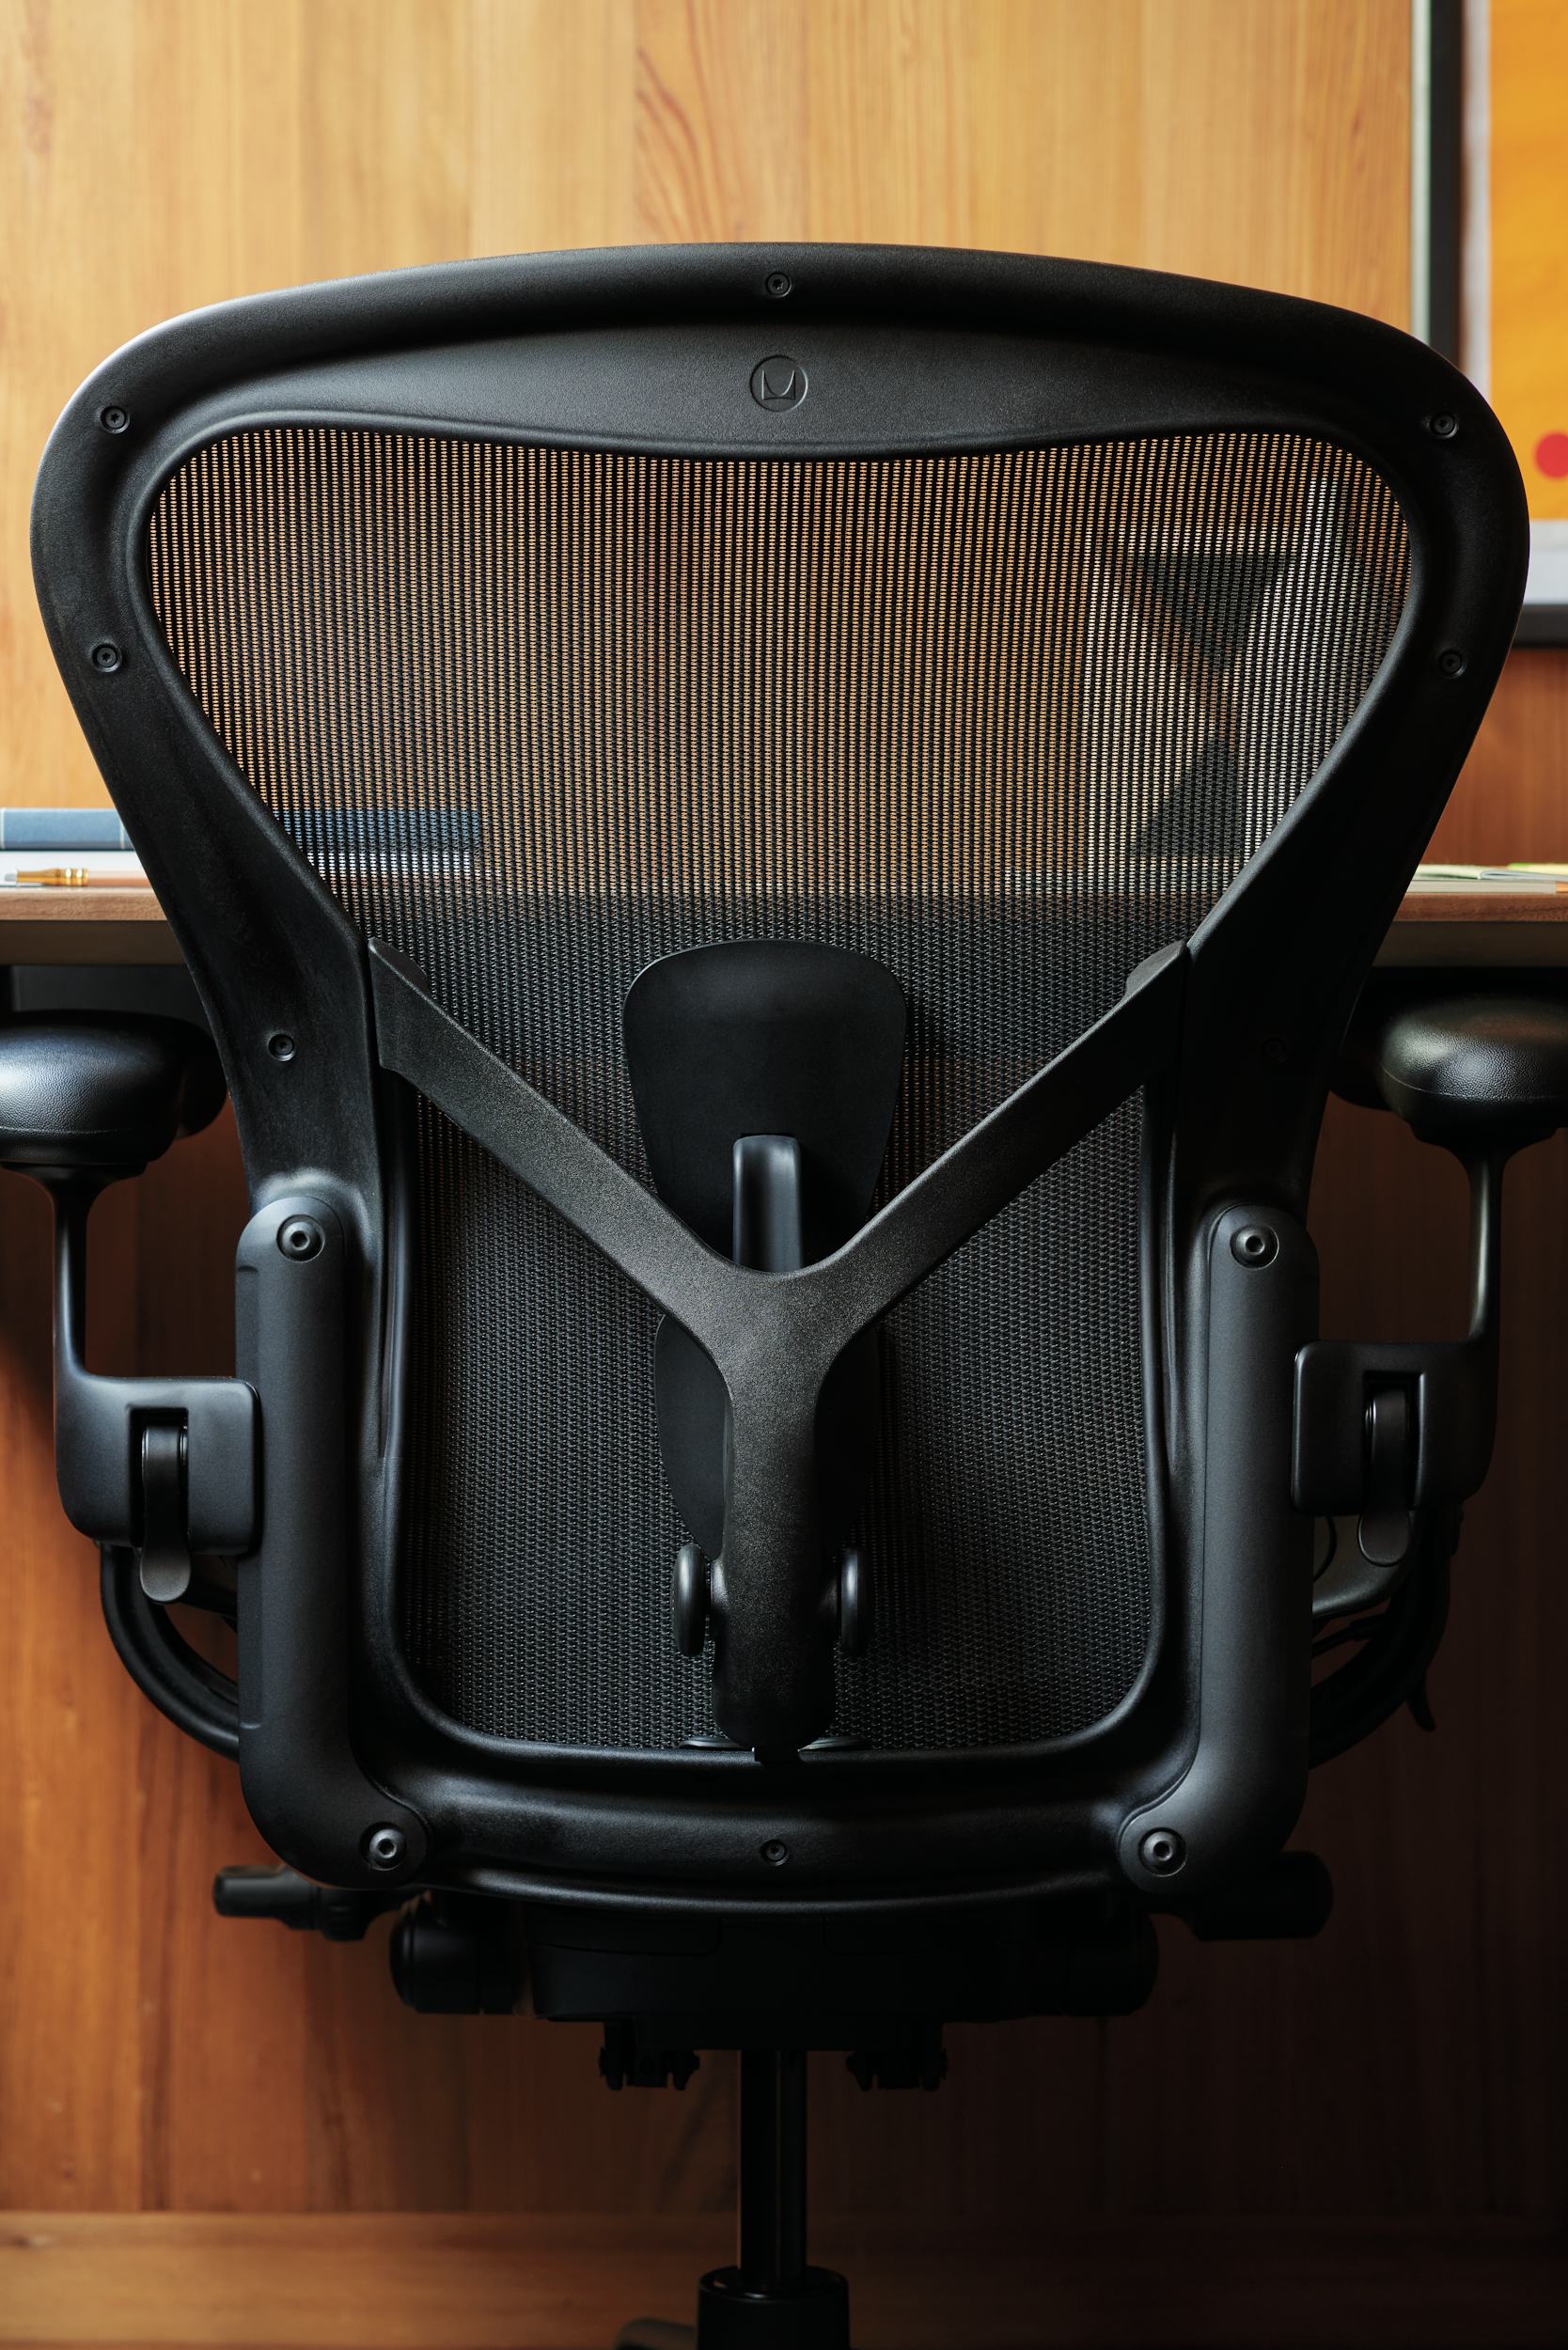 Home Office Chairs – Herman Miller